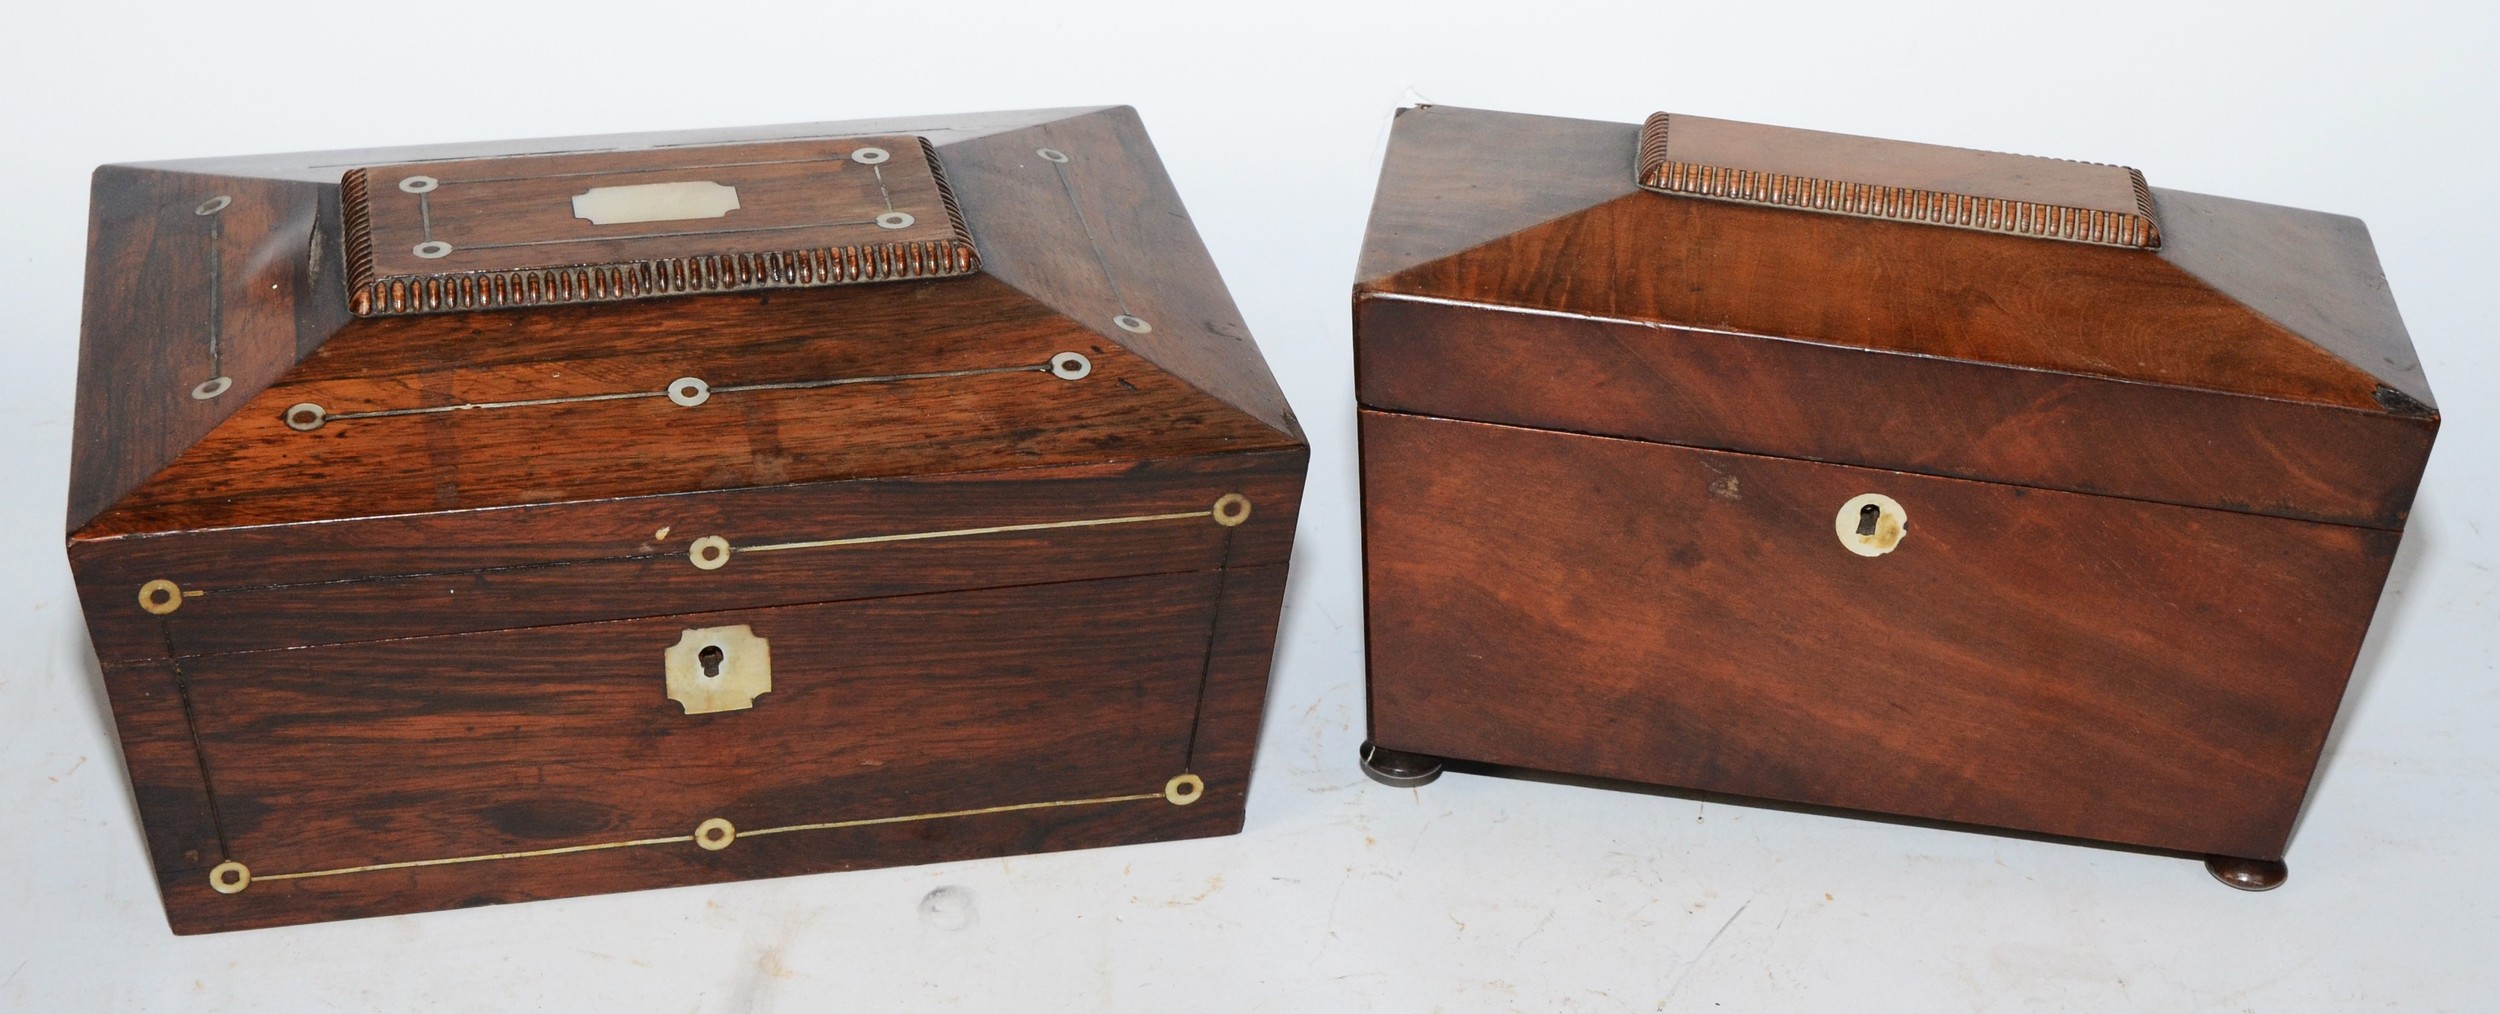 An Edwardian rosewood jewellery box, having inset mother of pearl decoration, 30x22cm, together with